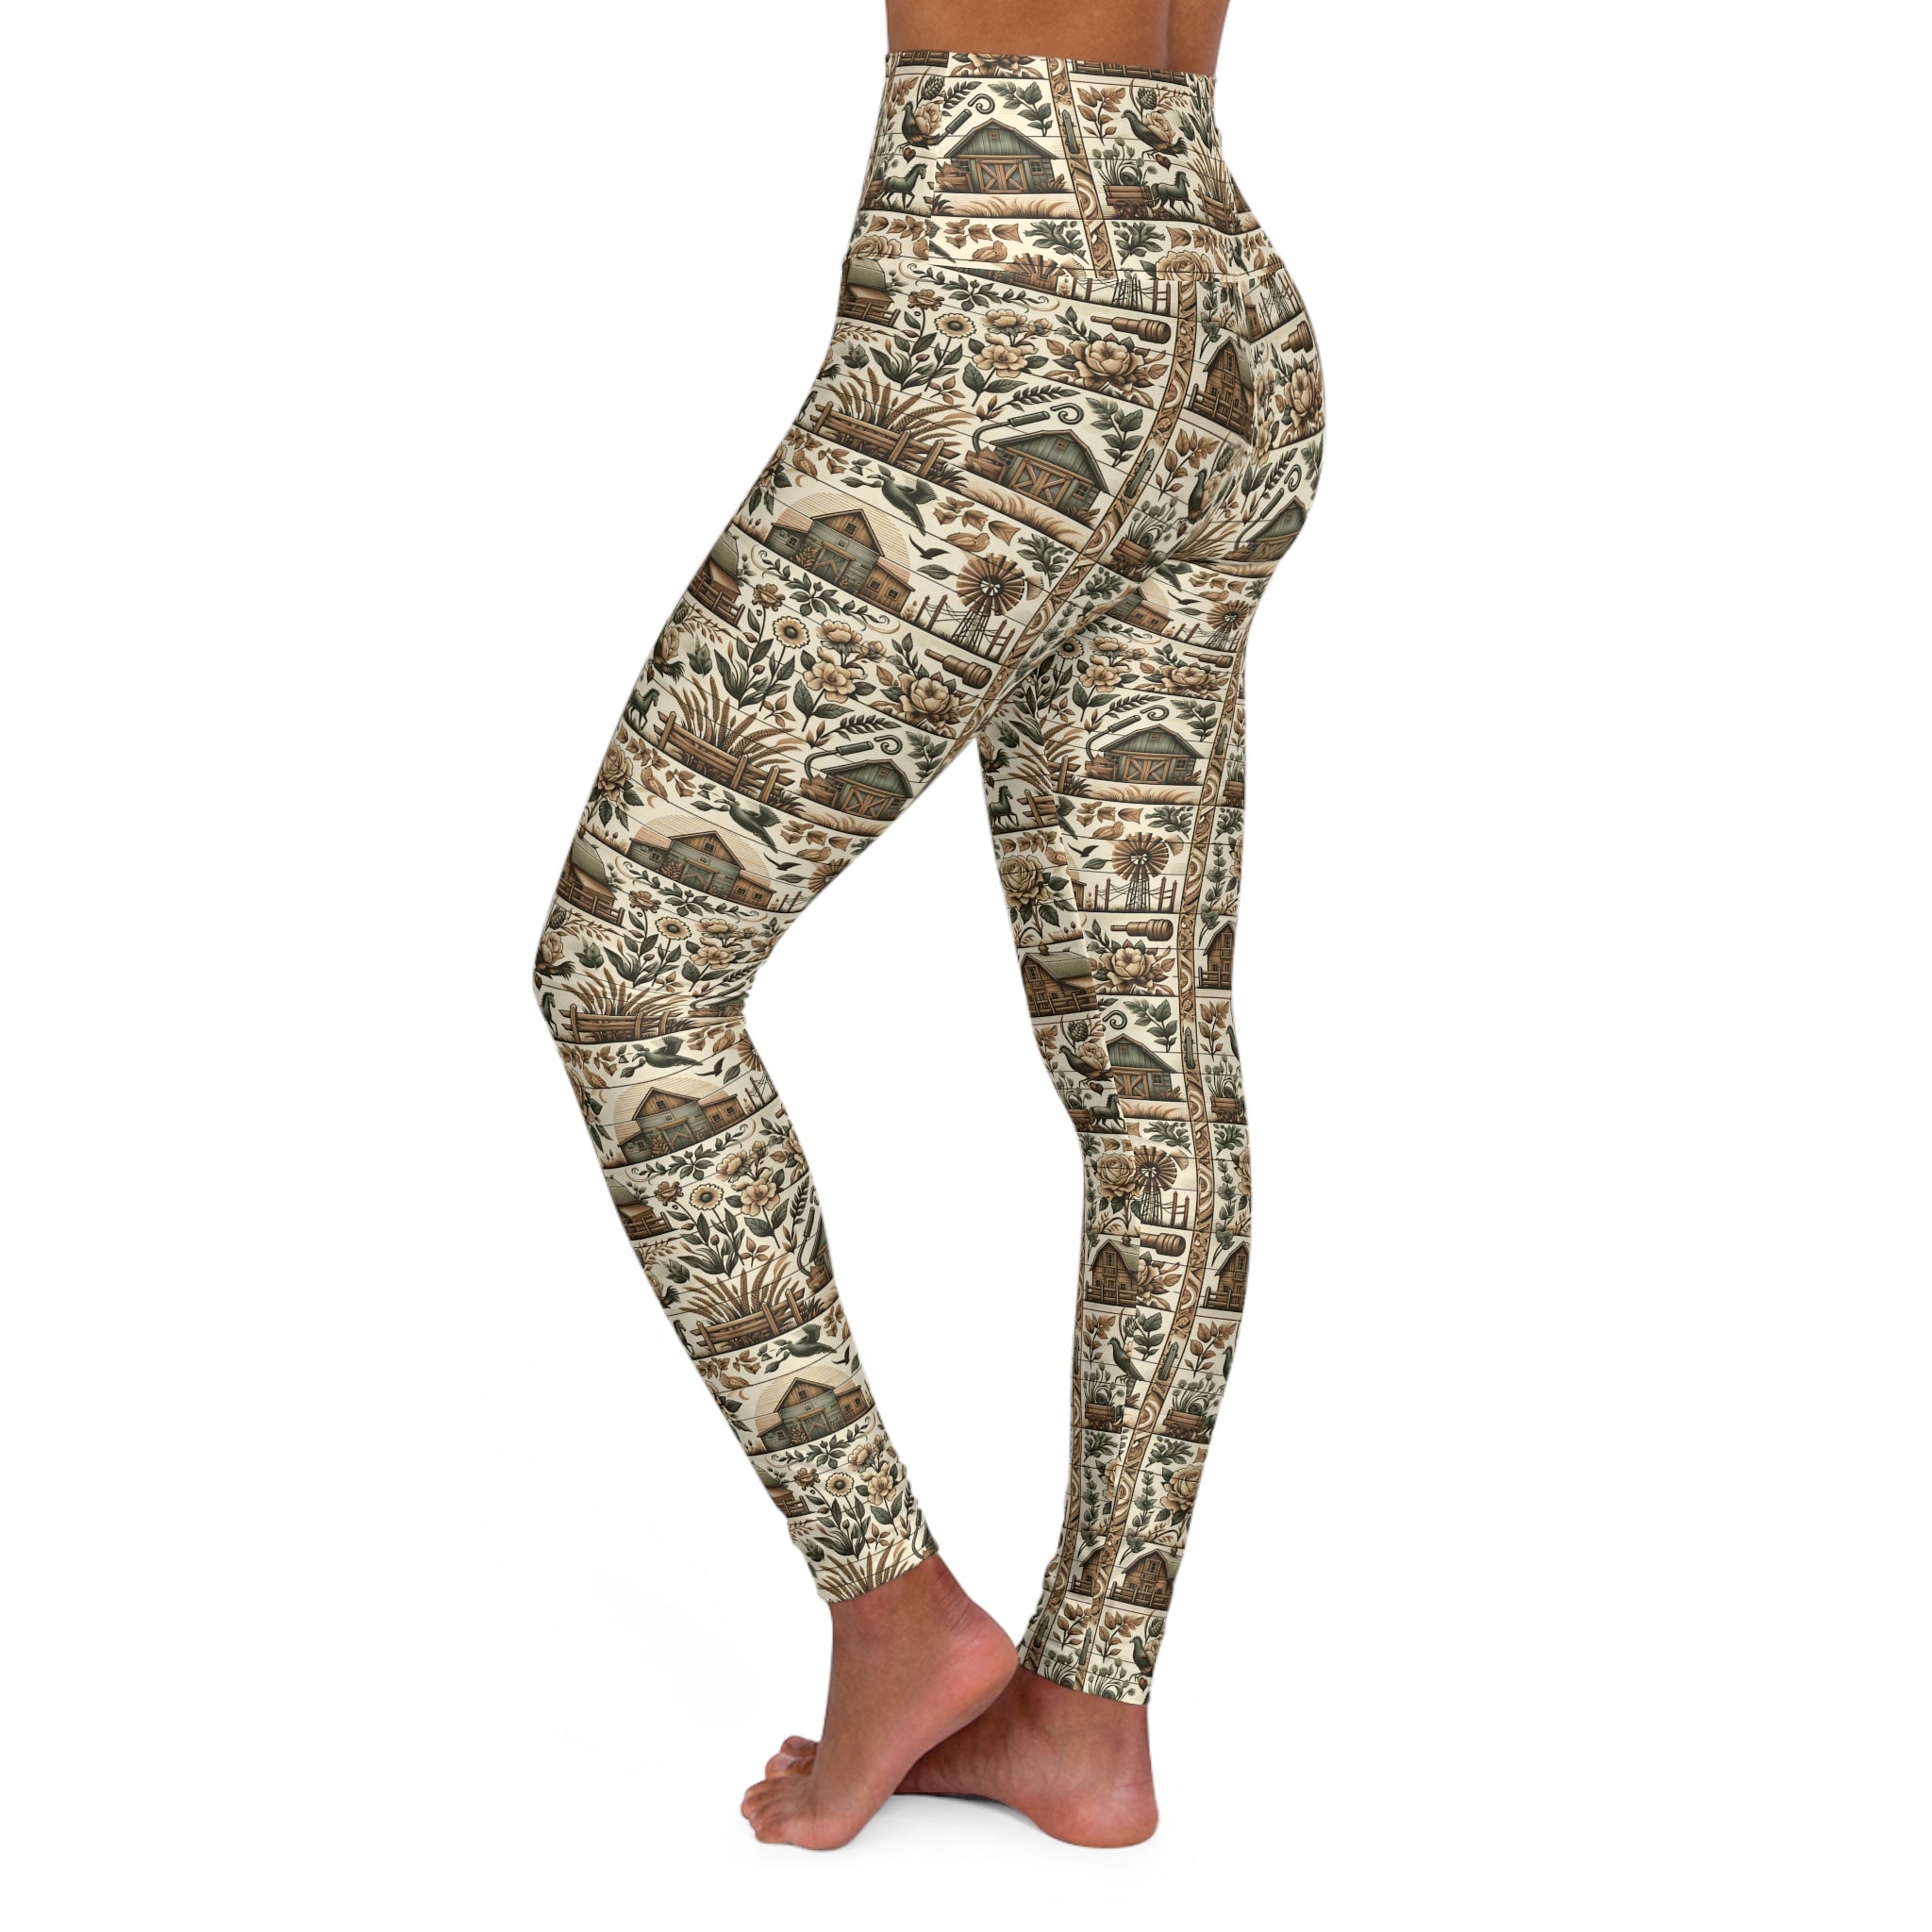 Rustic Country Gym Leggings for Women S-2XL - High Waist Fit